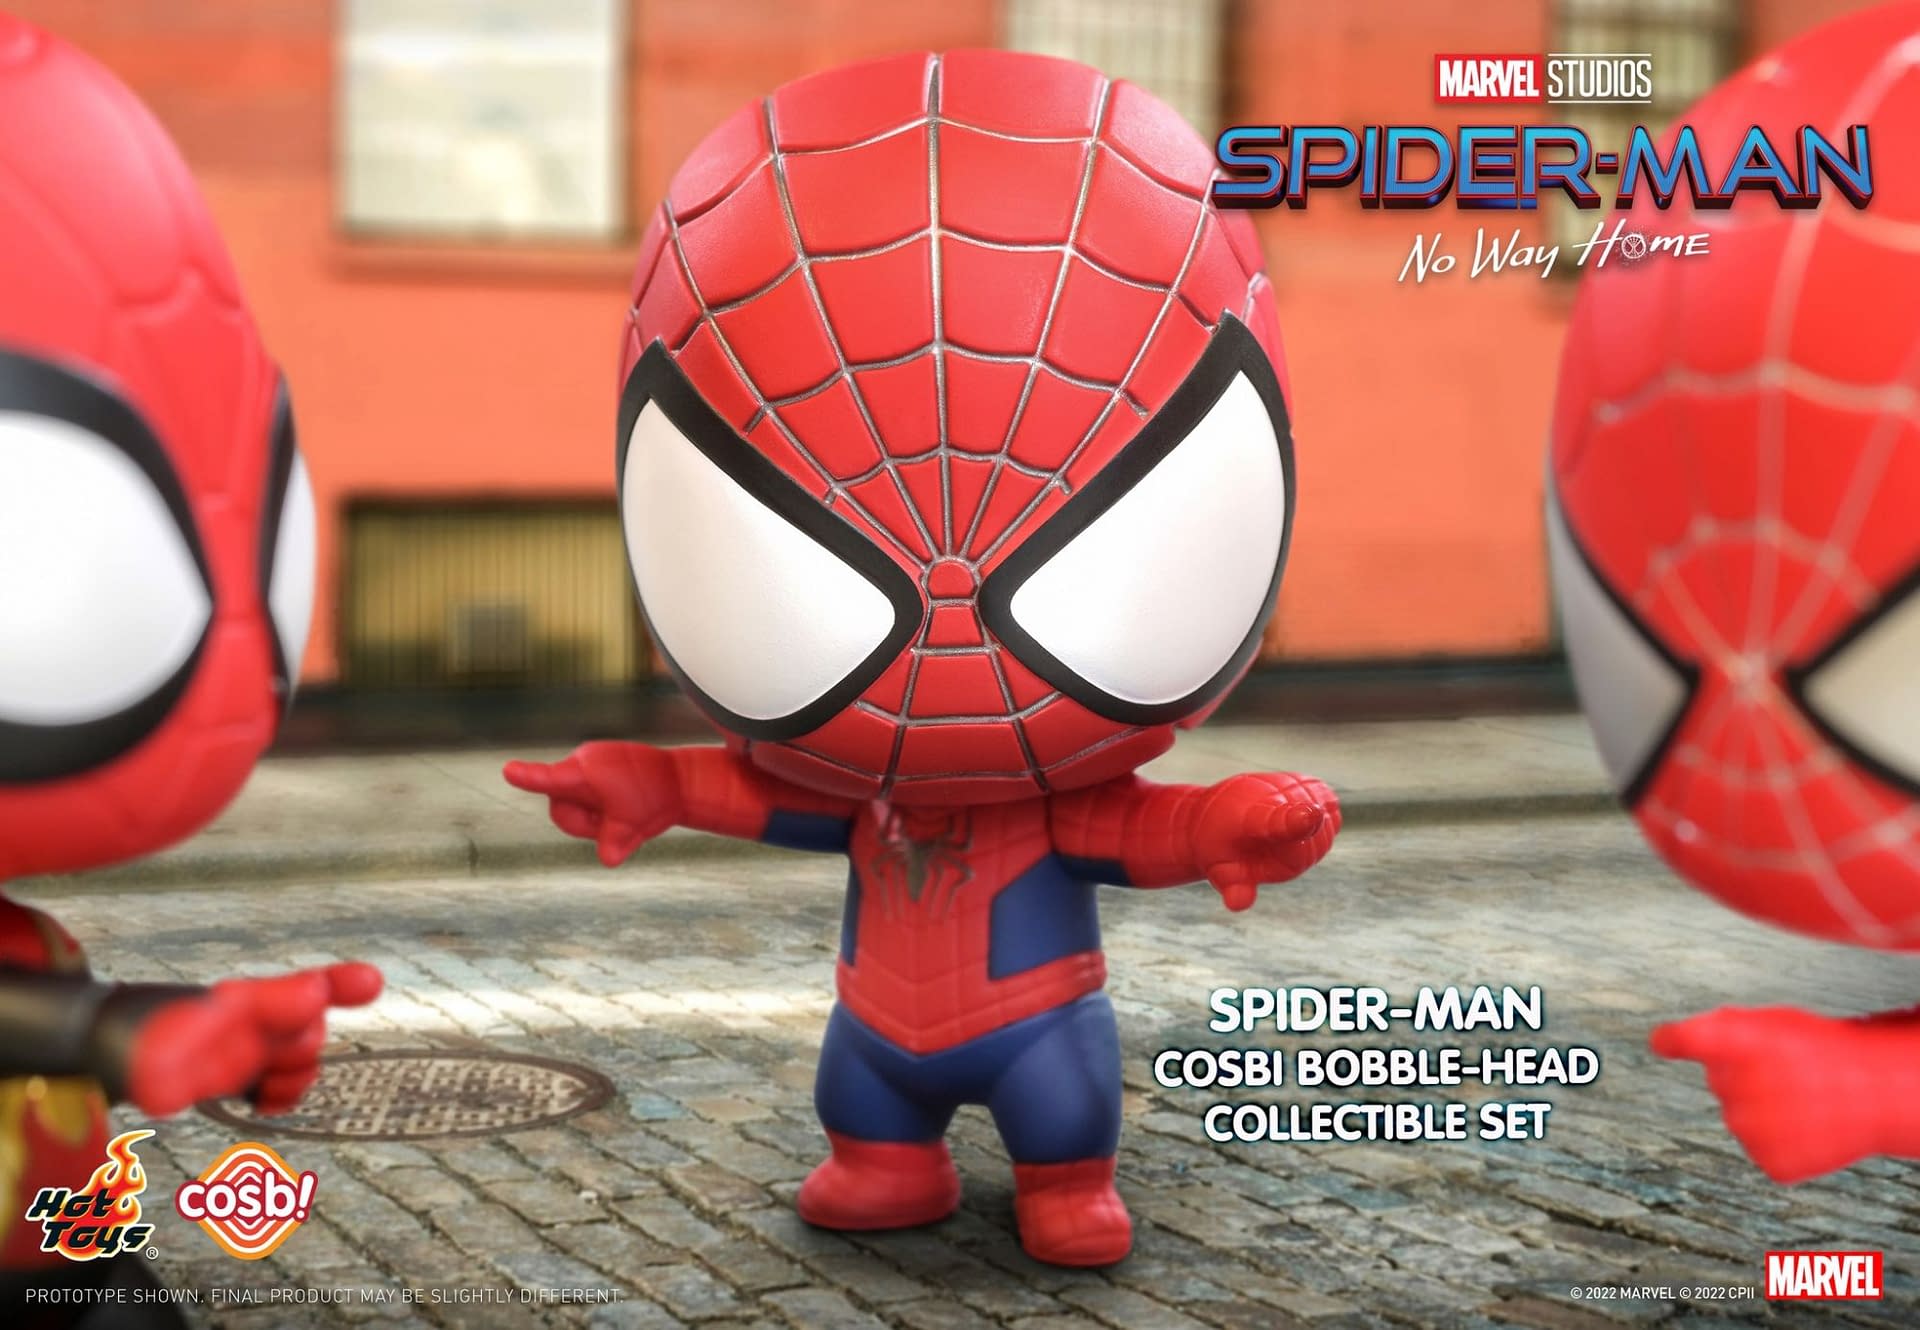 Spider-Man: No Way Home Three Peters Meme Cosbaby Set Hits Hot Toys